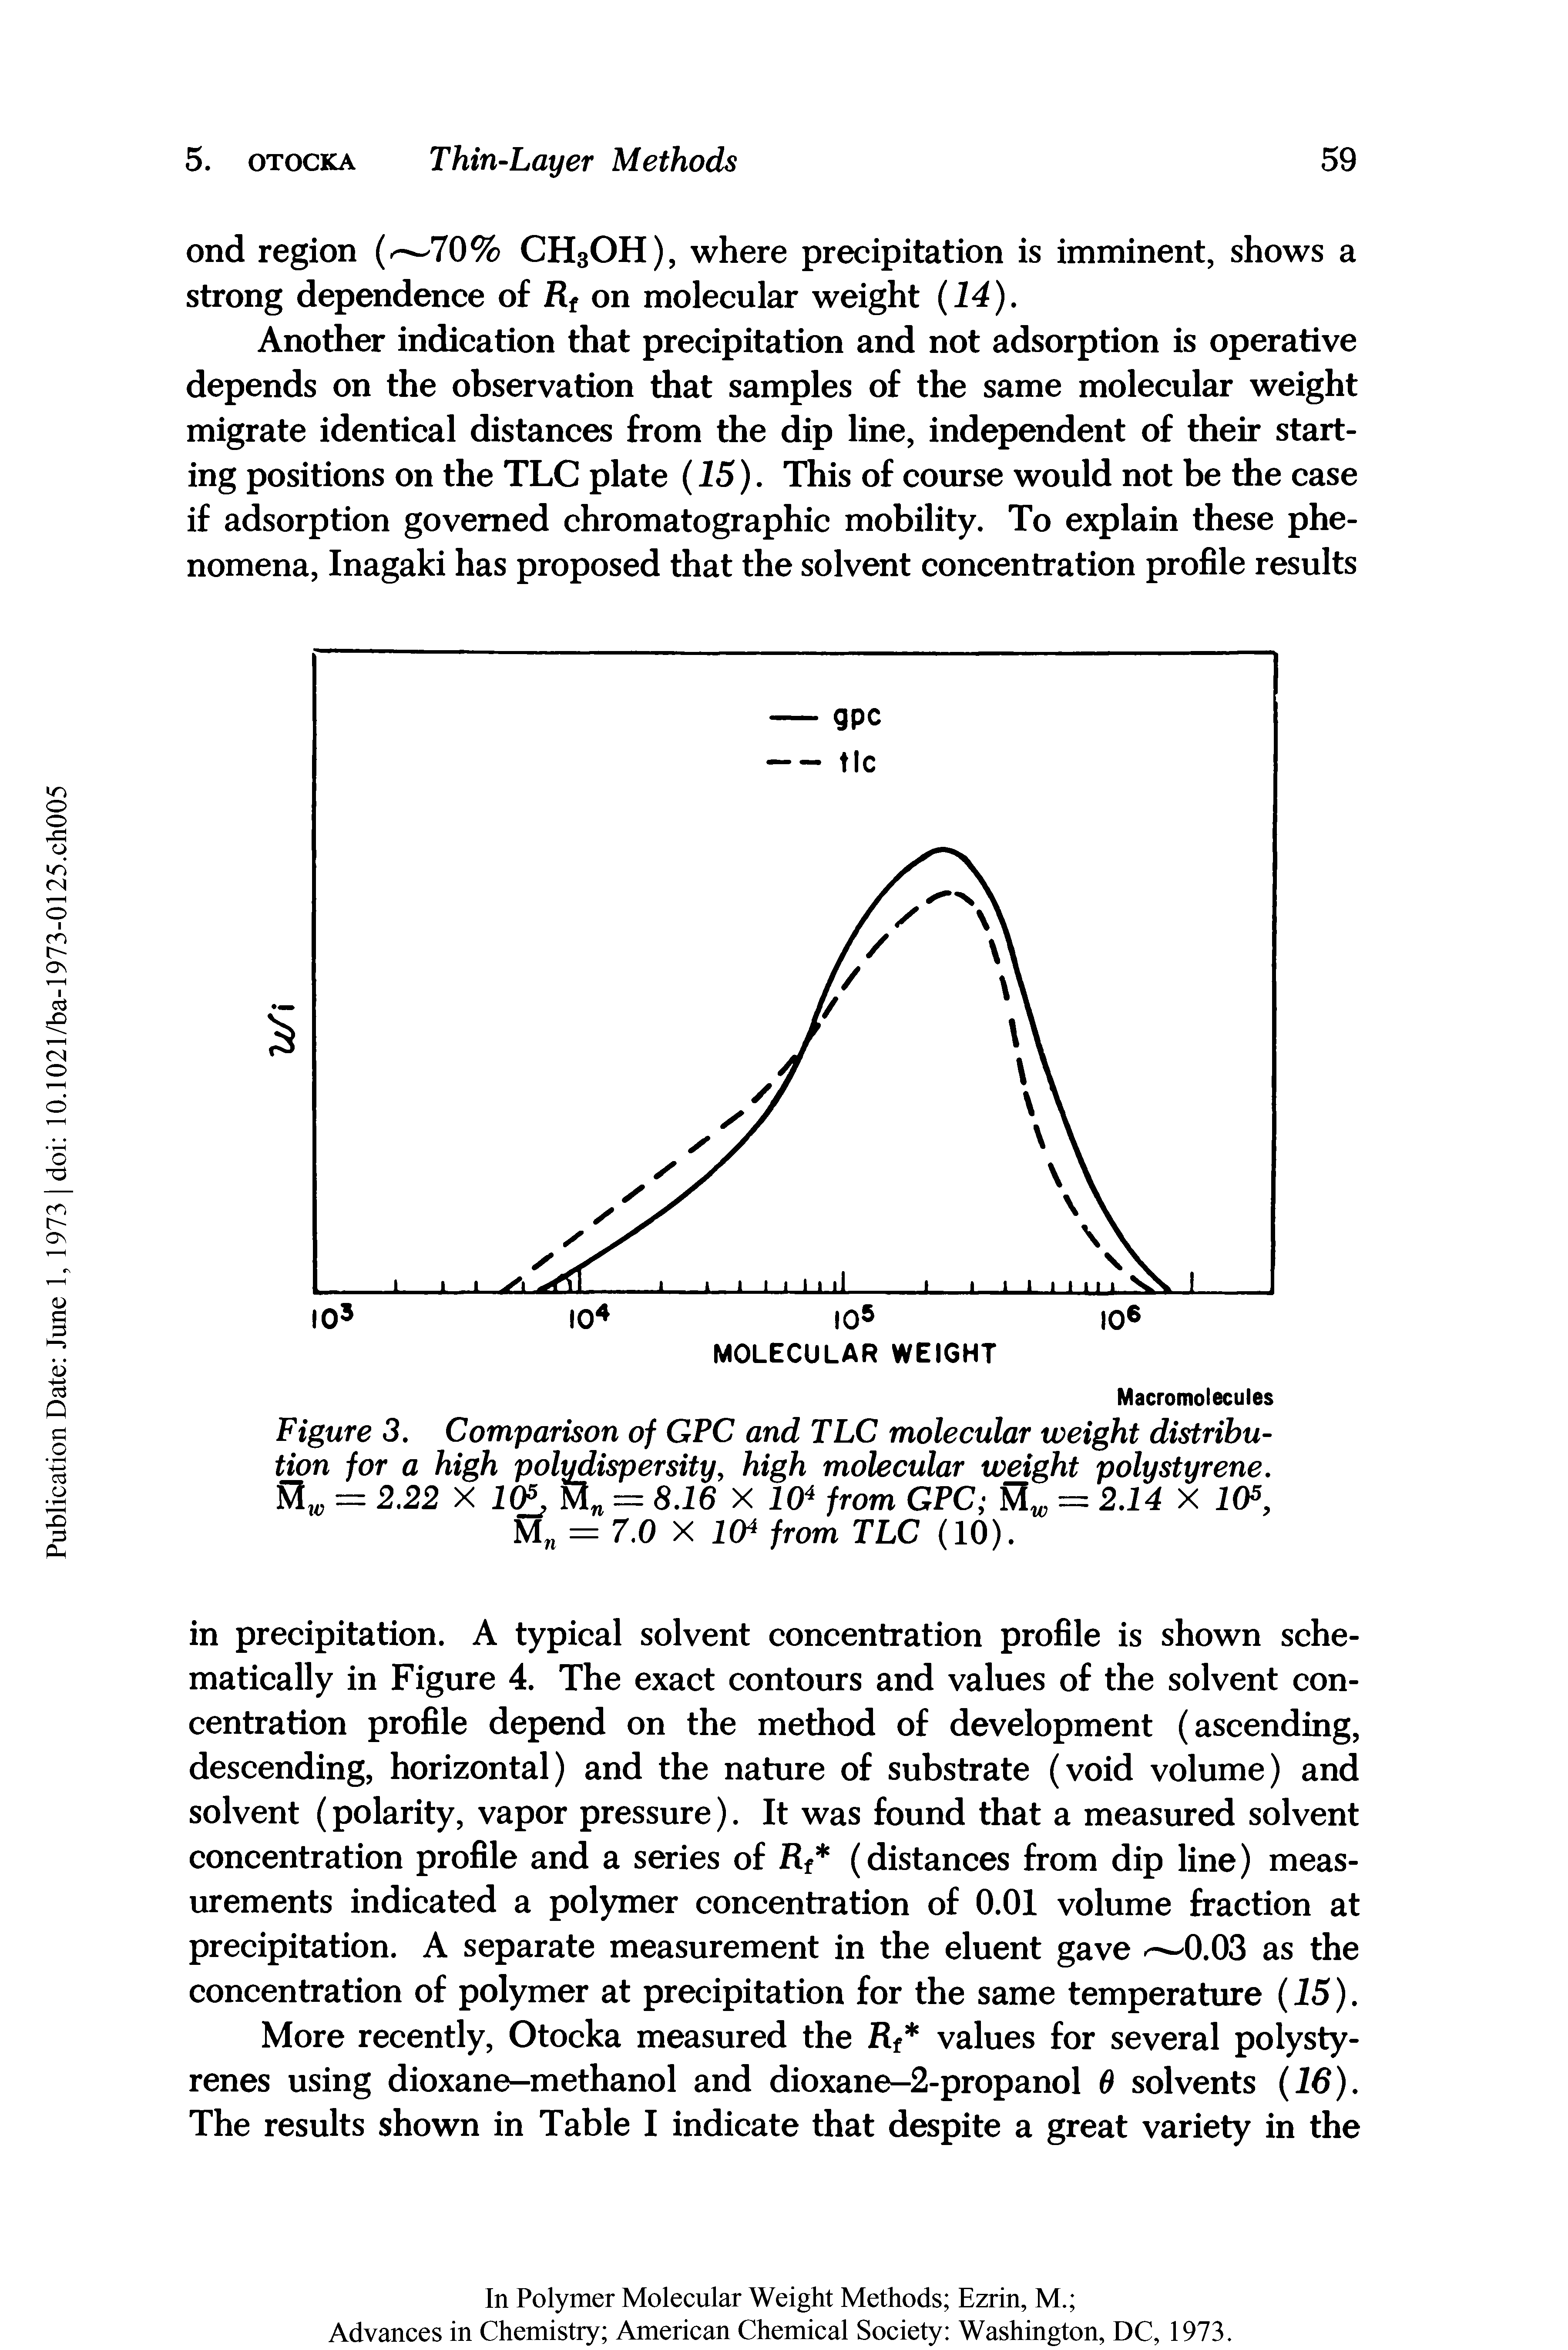 Figure 3. Comparison of GPC and TLC molecular weight distribution for a high polydispersity, high molecular weight polystyrene. ttw = 2.22 X 10f, Mn = 8.16 X 104 from GPC ttw = 2.14 X I05,...